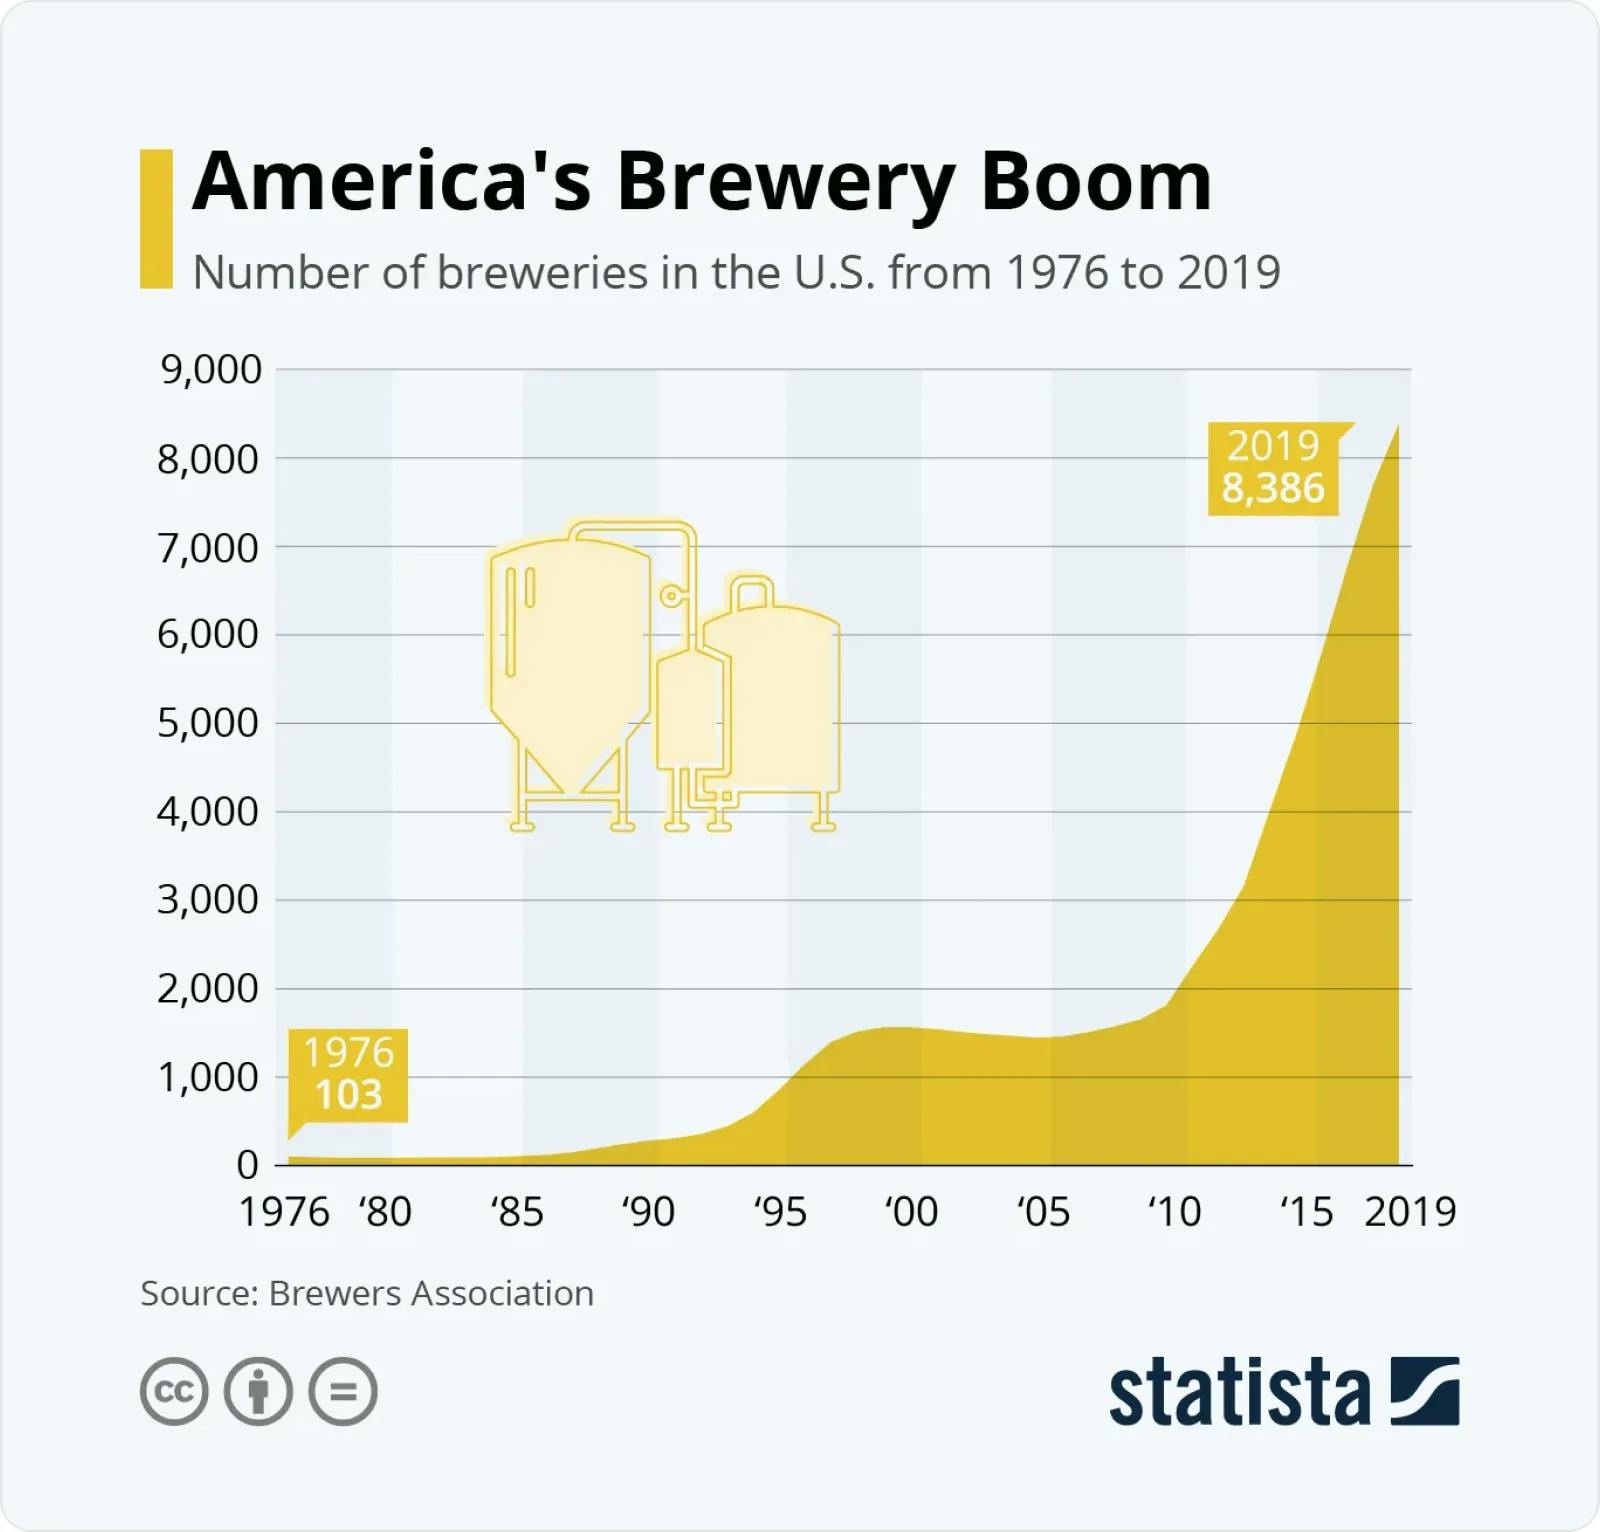 America's brewery boom from 1976 to 2019